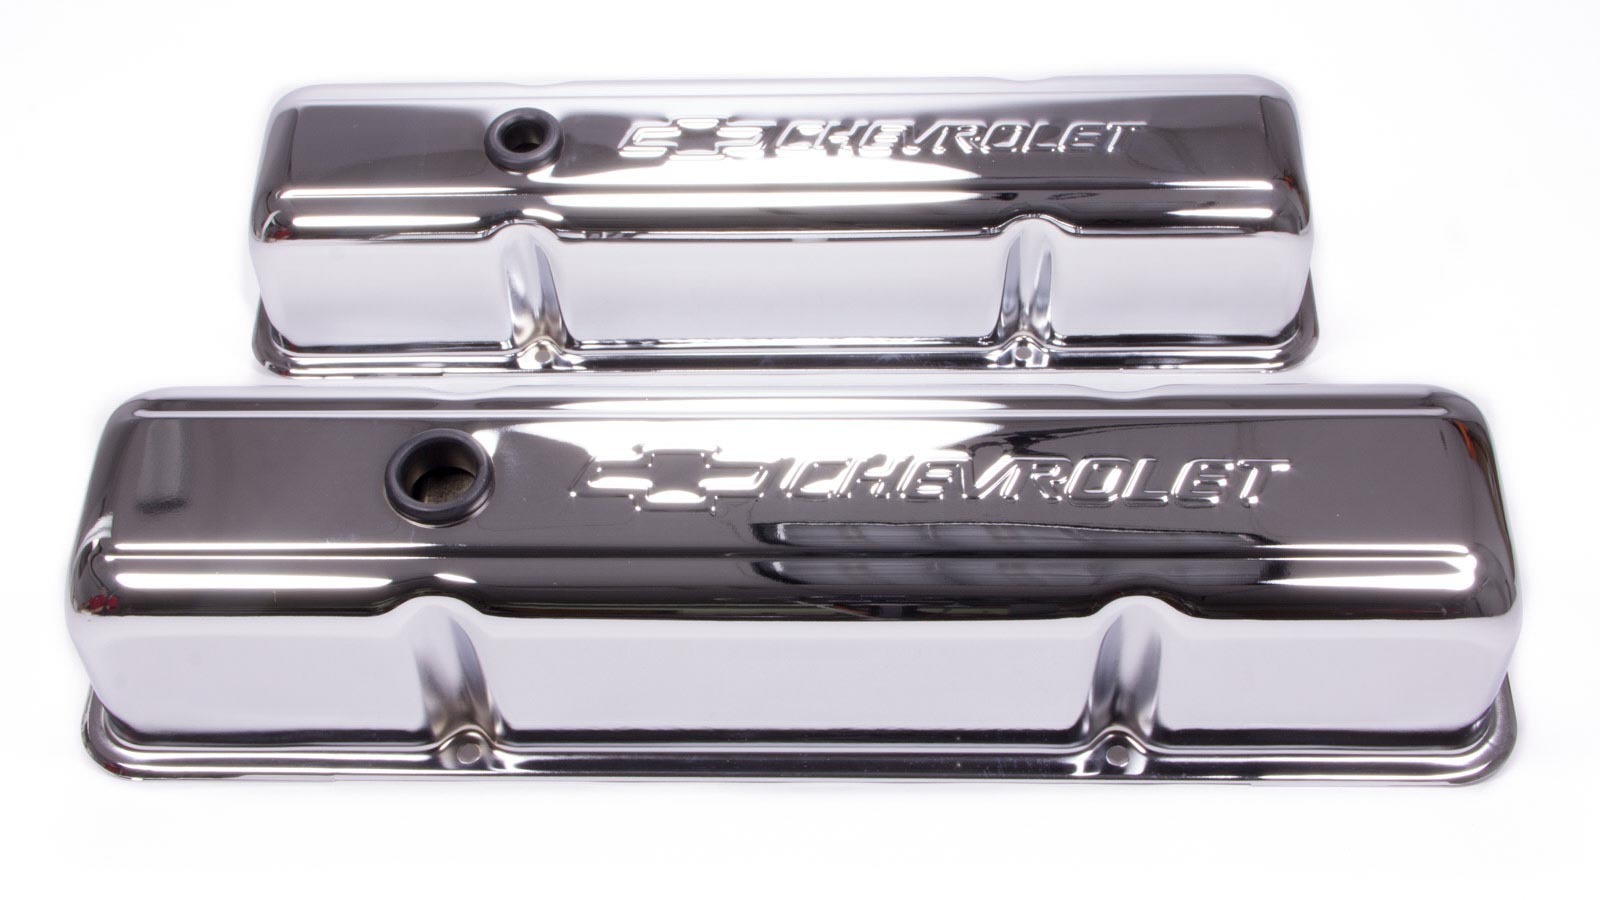 Proform 141-103 Valve Cover, Tall, Baffled, Breather Hole, Chevrolet Bowtie Logo, Steel, Chrome, Small Block Chevy, Pair